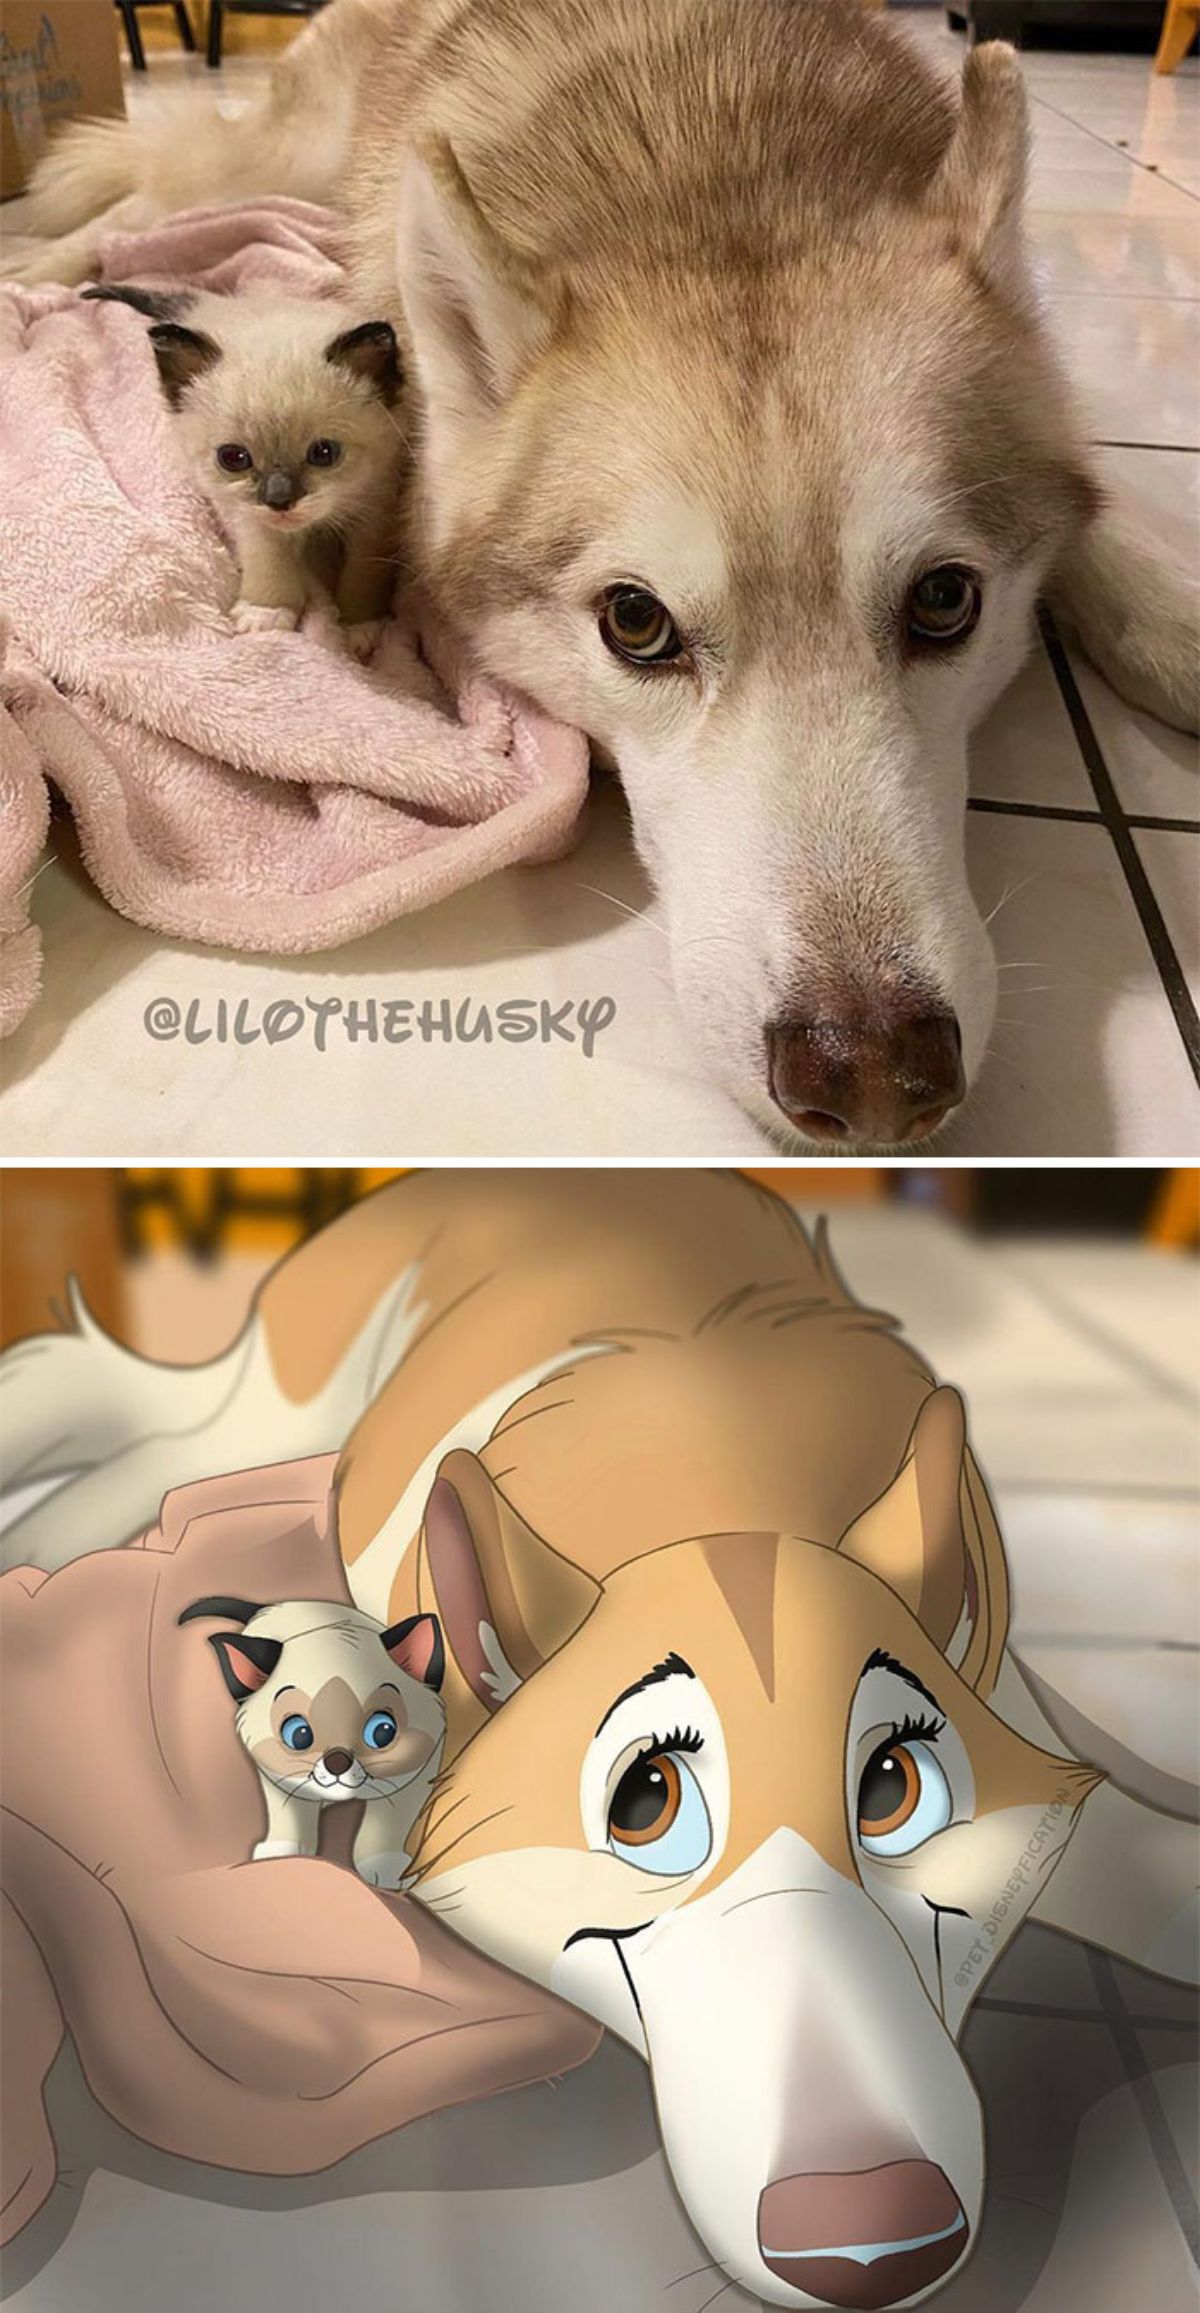 real photo and cartoon image of a light brown siamese kitten laying on a pink blanket next to a brown husky laying on the floor